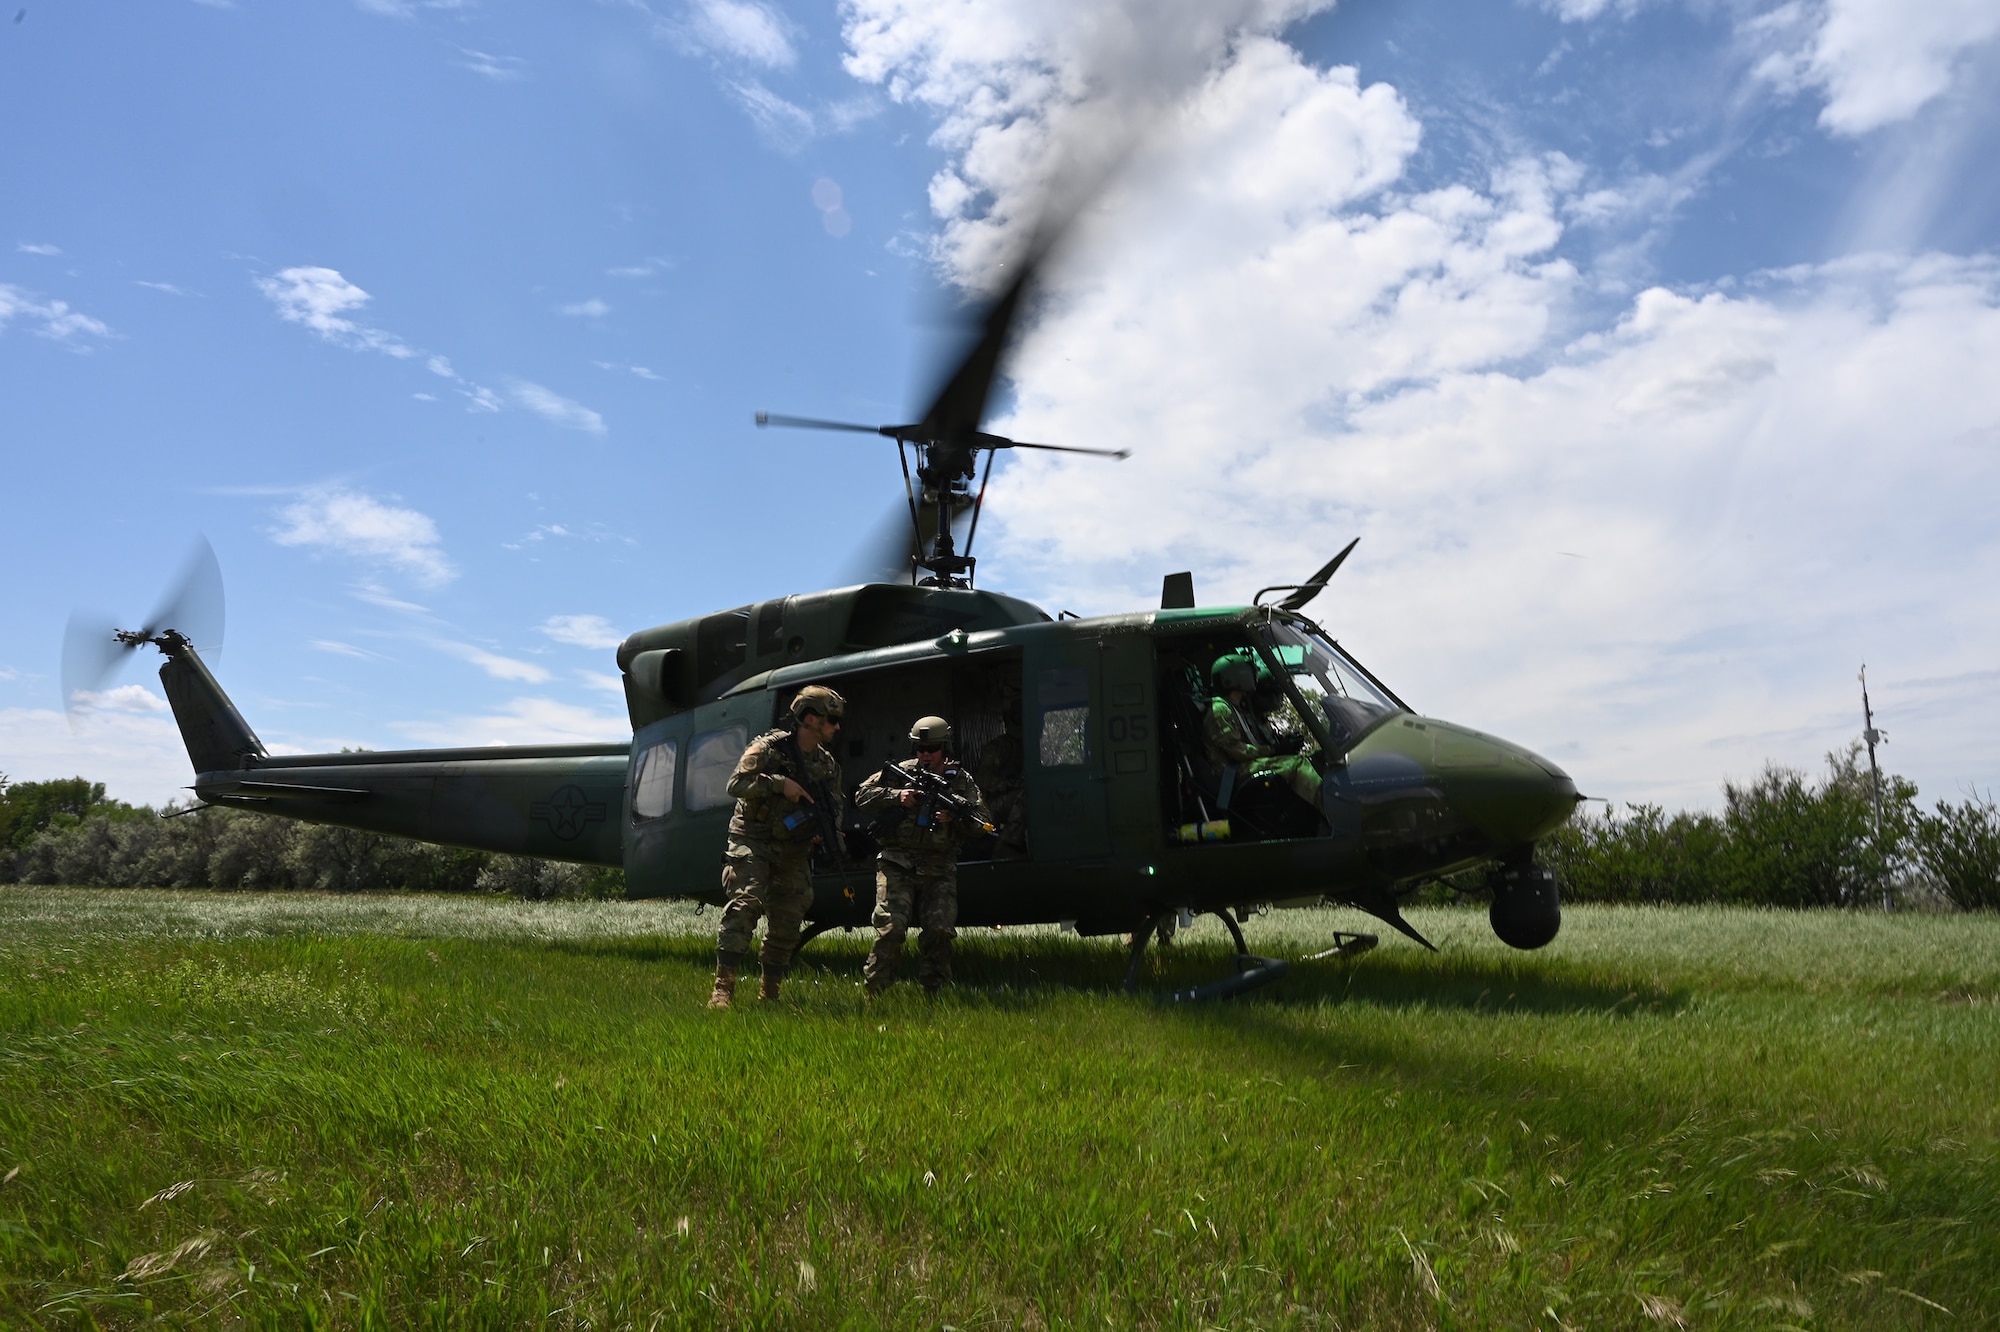 Two members of the 219th Security Forces Squadron in military uniform hop off a UH-1N Huey helicopter with rotor blades in motion during a training exercise at the Minot Air Force Base, N.D., June 24, 2021.